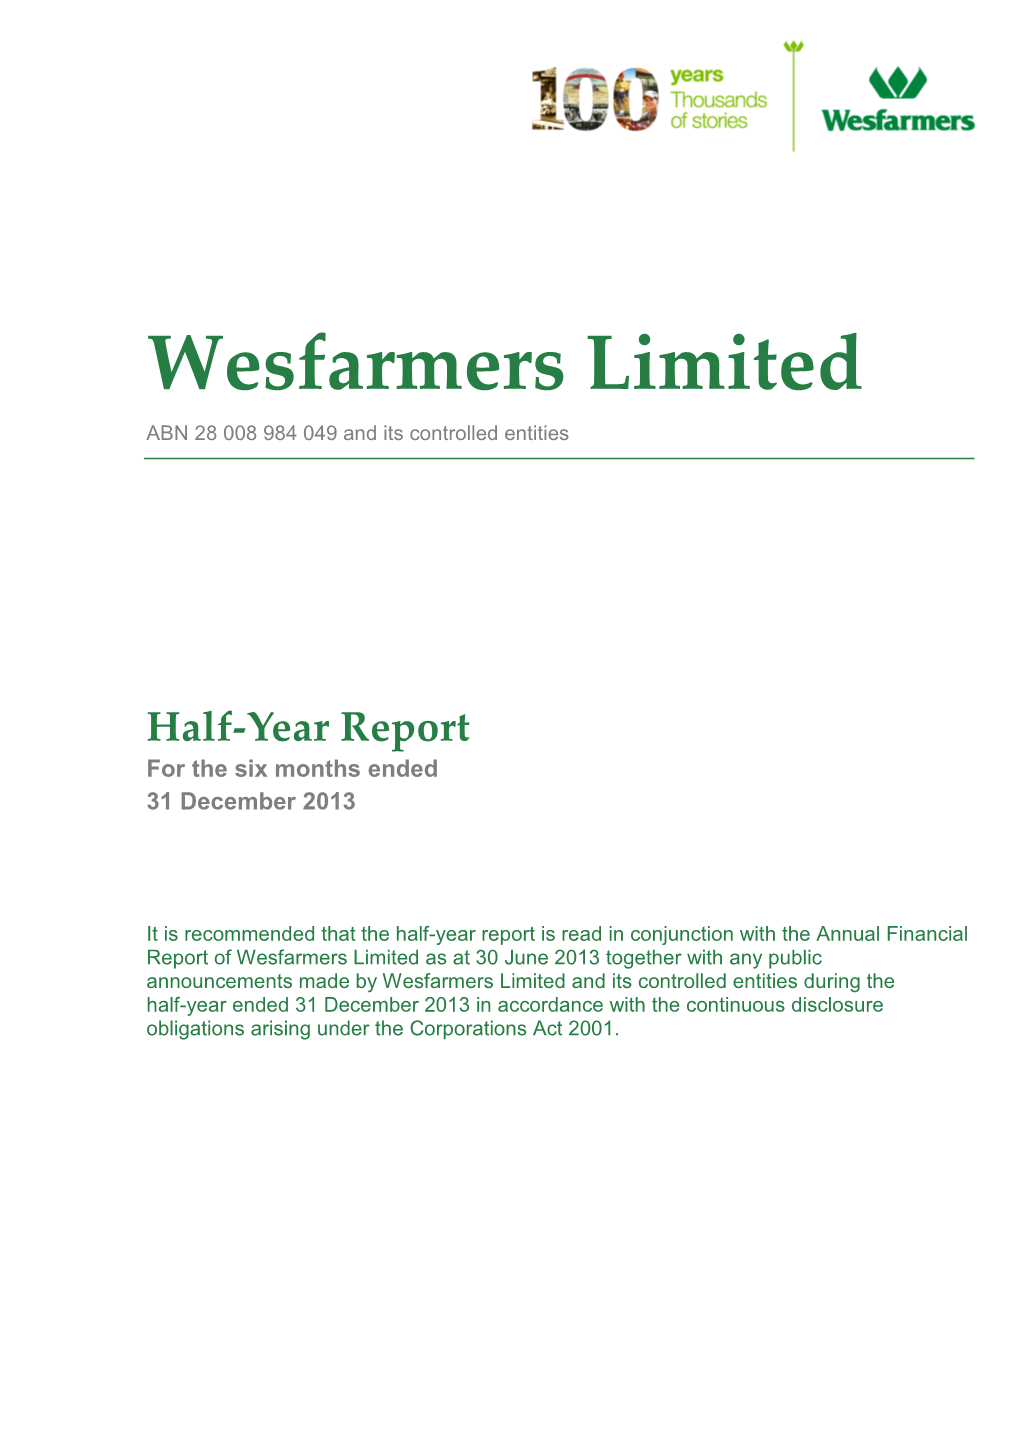 Wesfarmers Limited ABN 28 008 984 049 and Its Controlled Entities